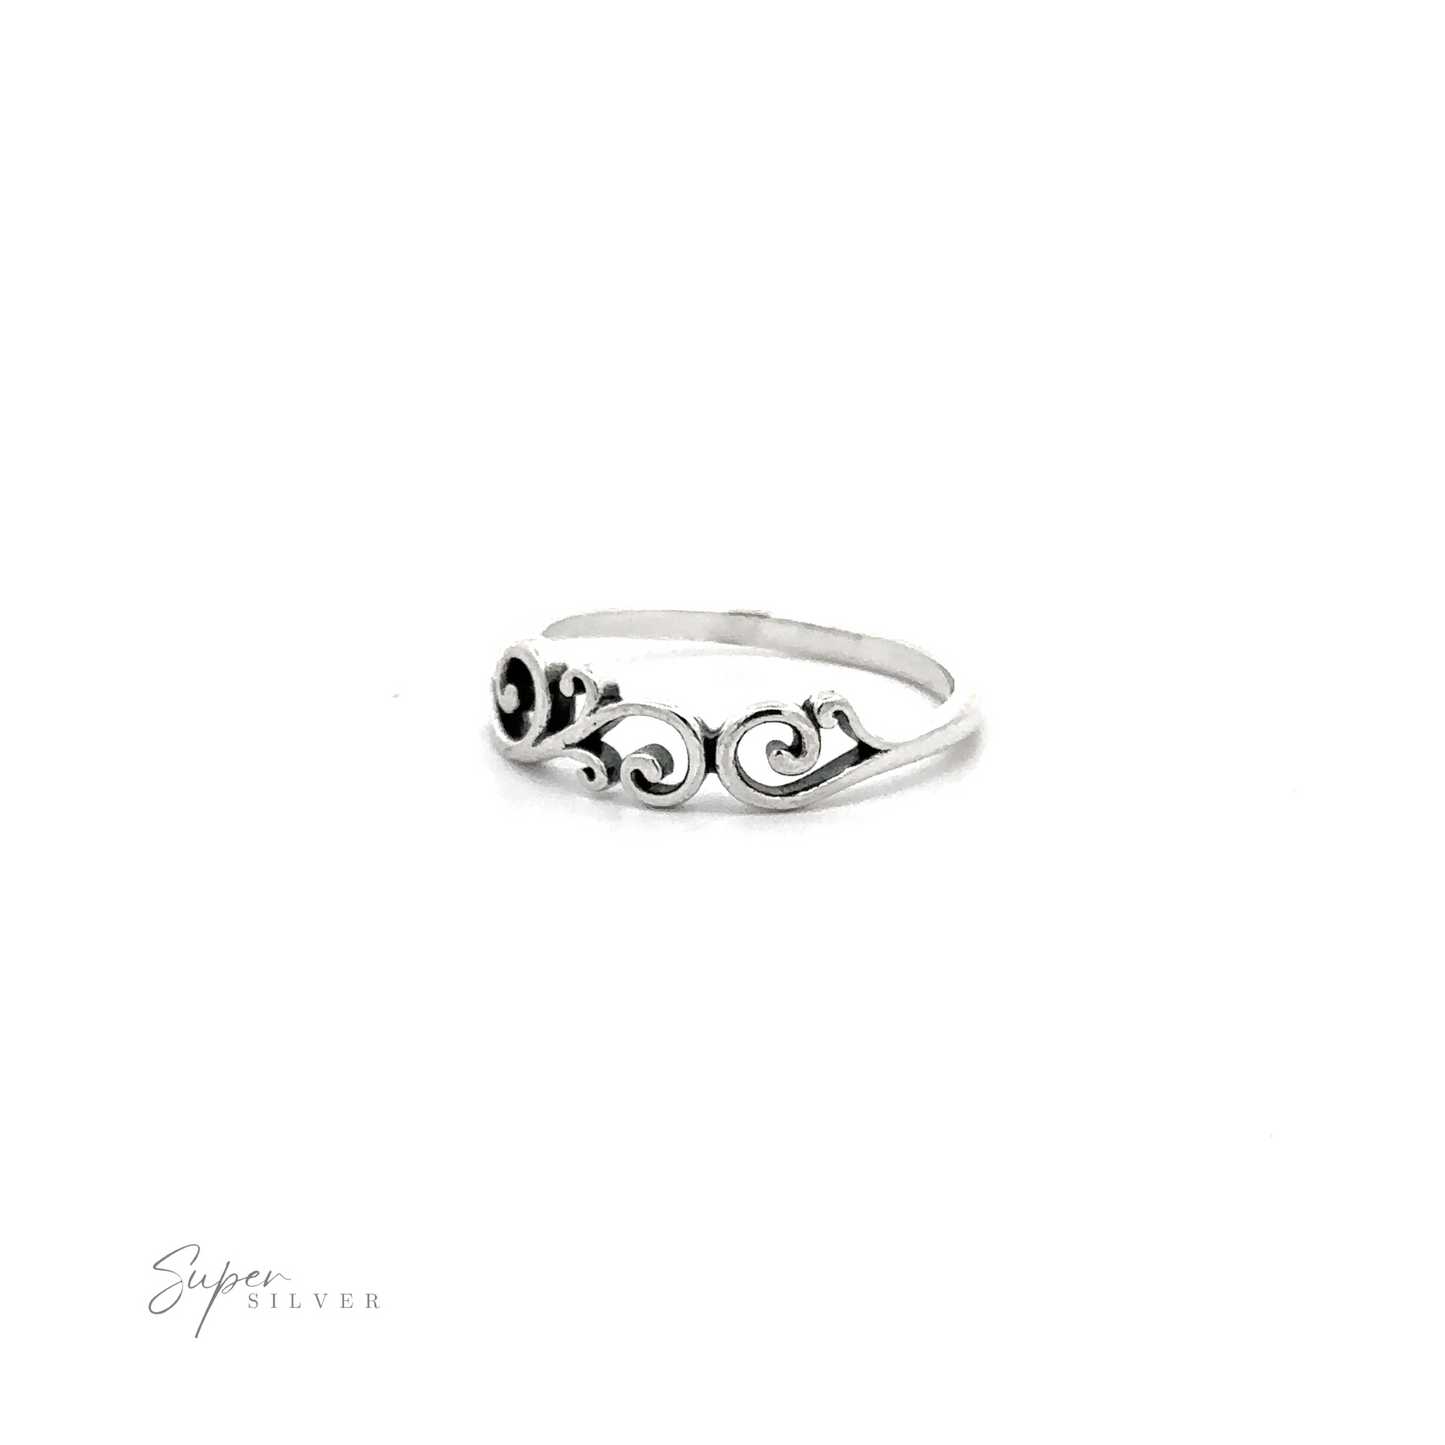 
                  
                    A 925 sterling silver Swirly Ring with a swirly design, featuring a high polish finish.
                  
                